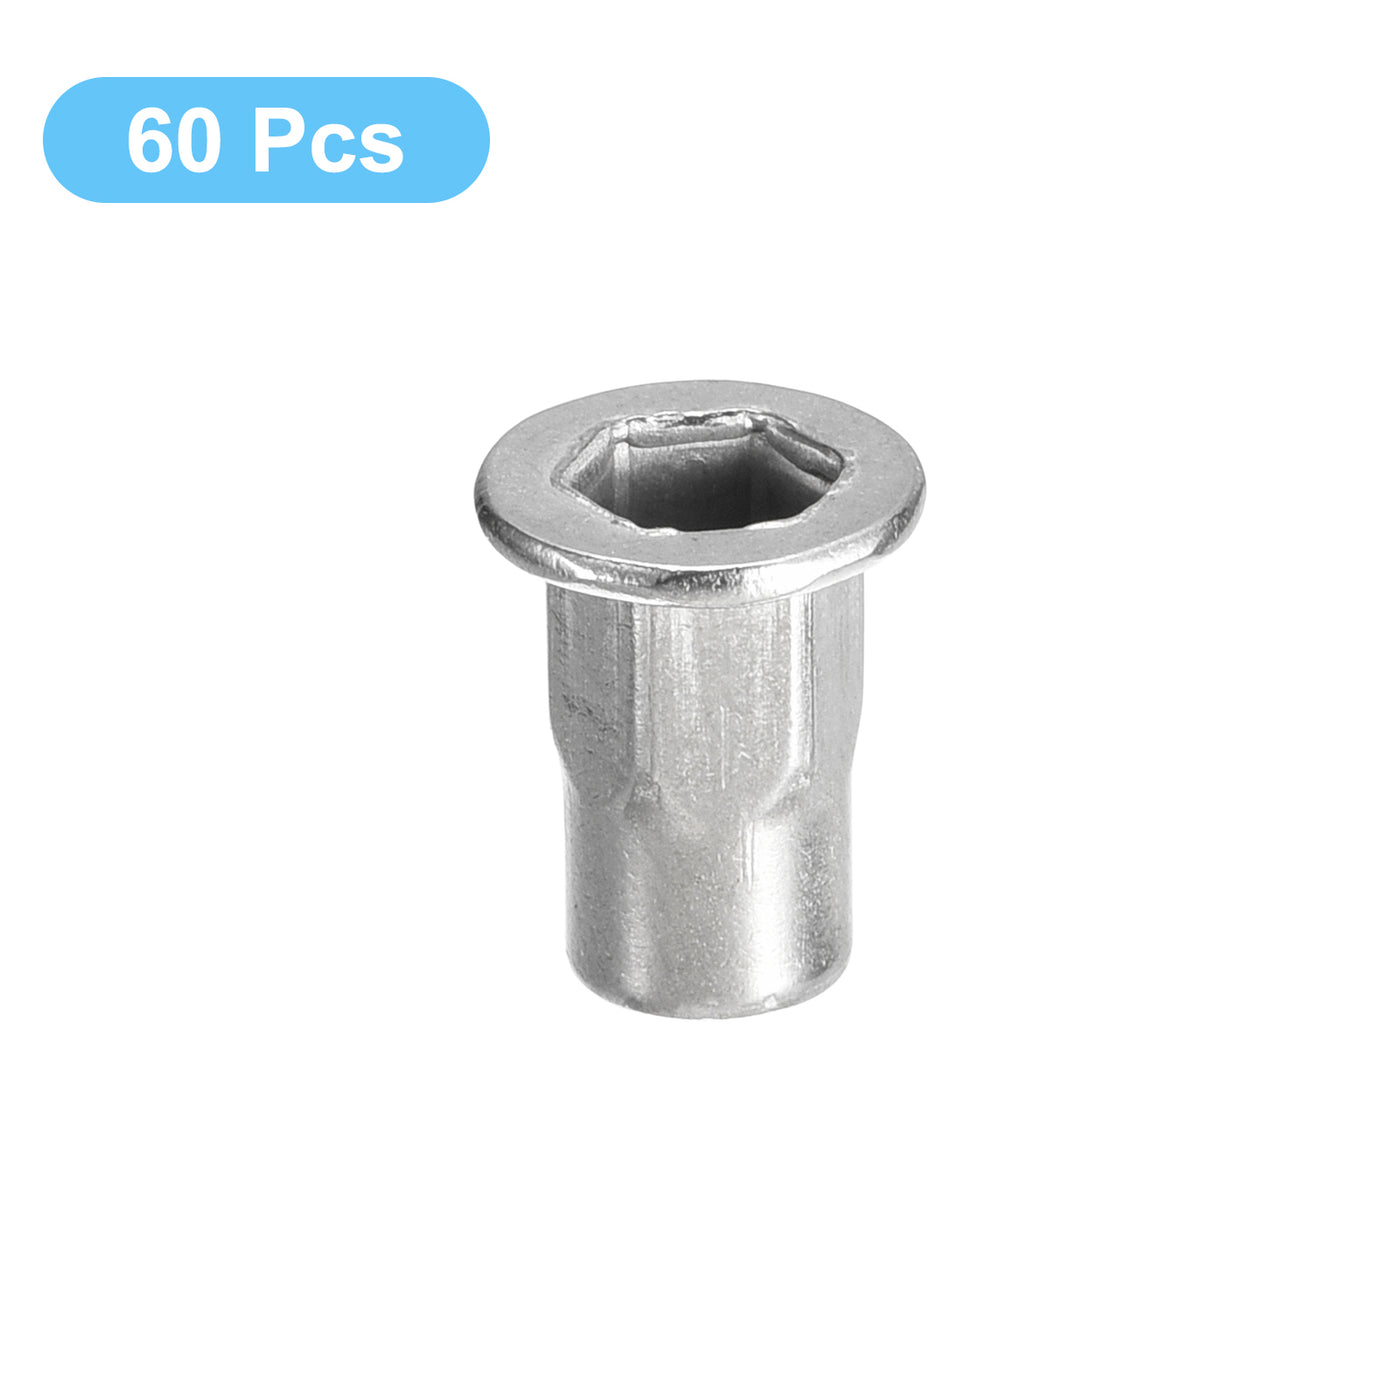 uxcell Uxcell Half Hex Body Rivet Nuts, 304 Stainless Steel Flat Head Threaded Insert Nuts